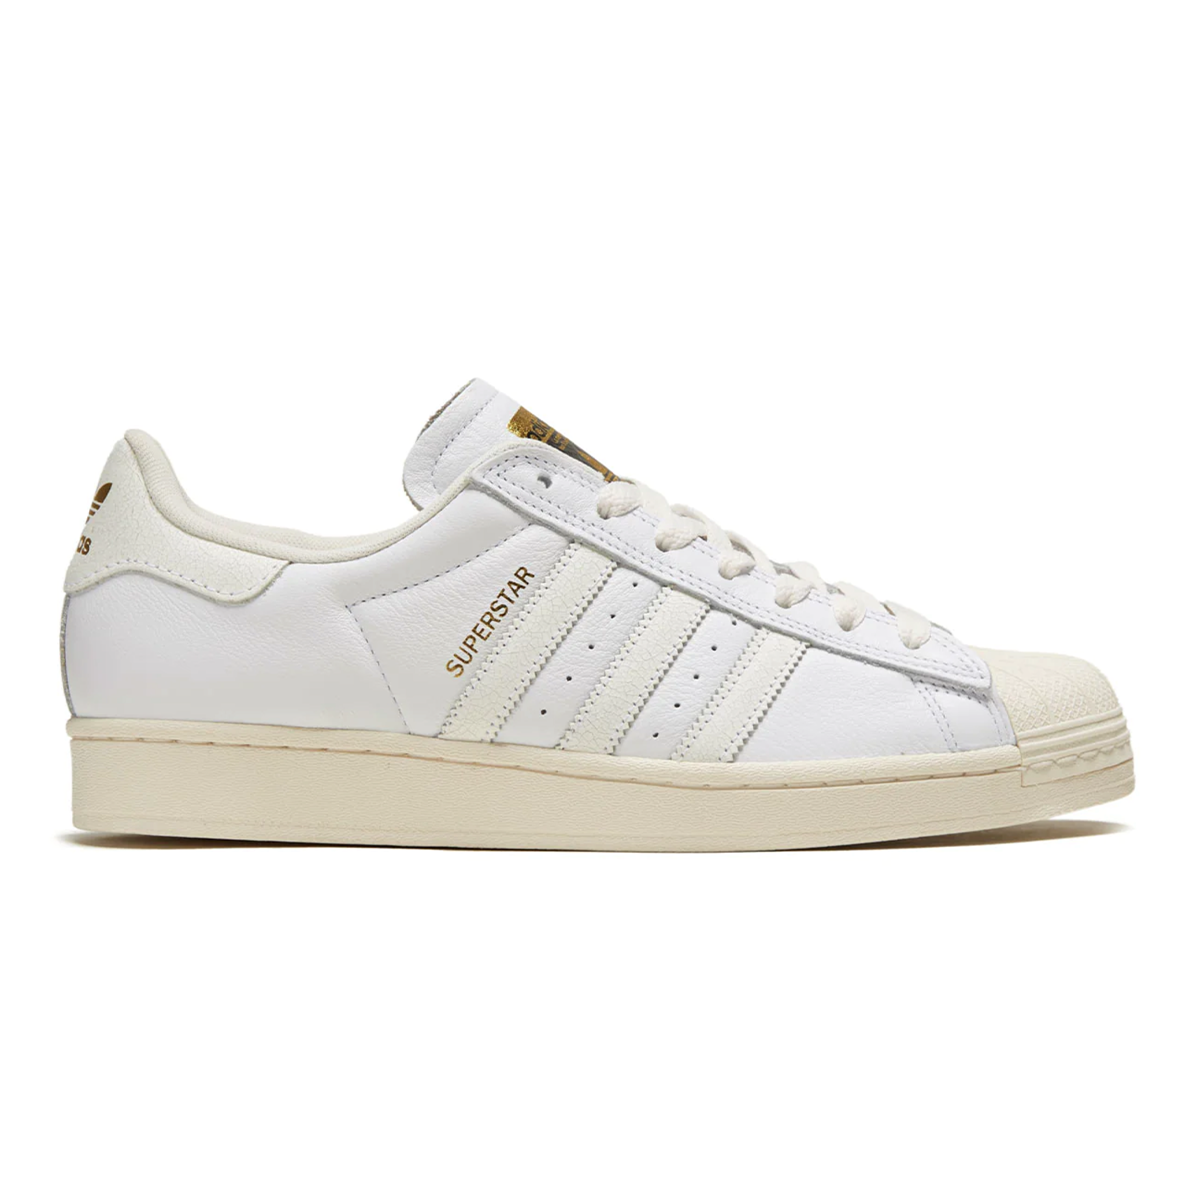 Adidas Superstar ADV Shoes - Cracked Leather/White